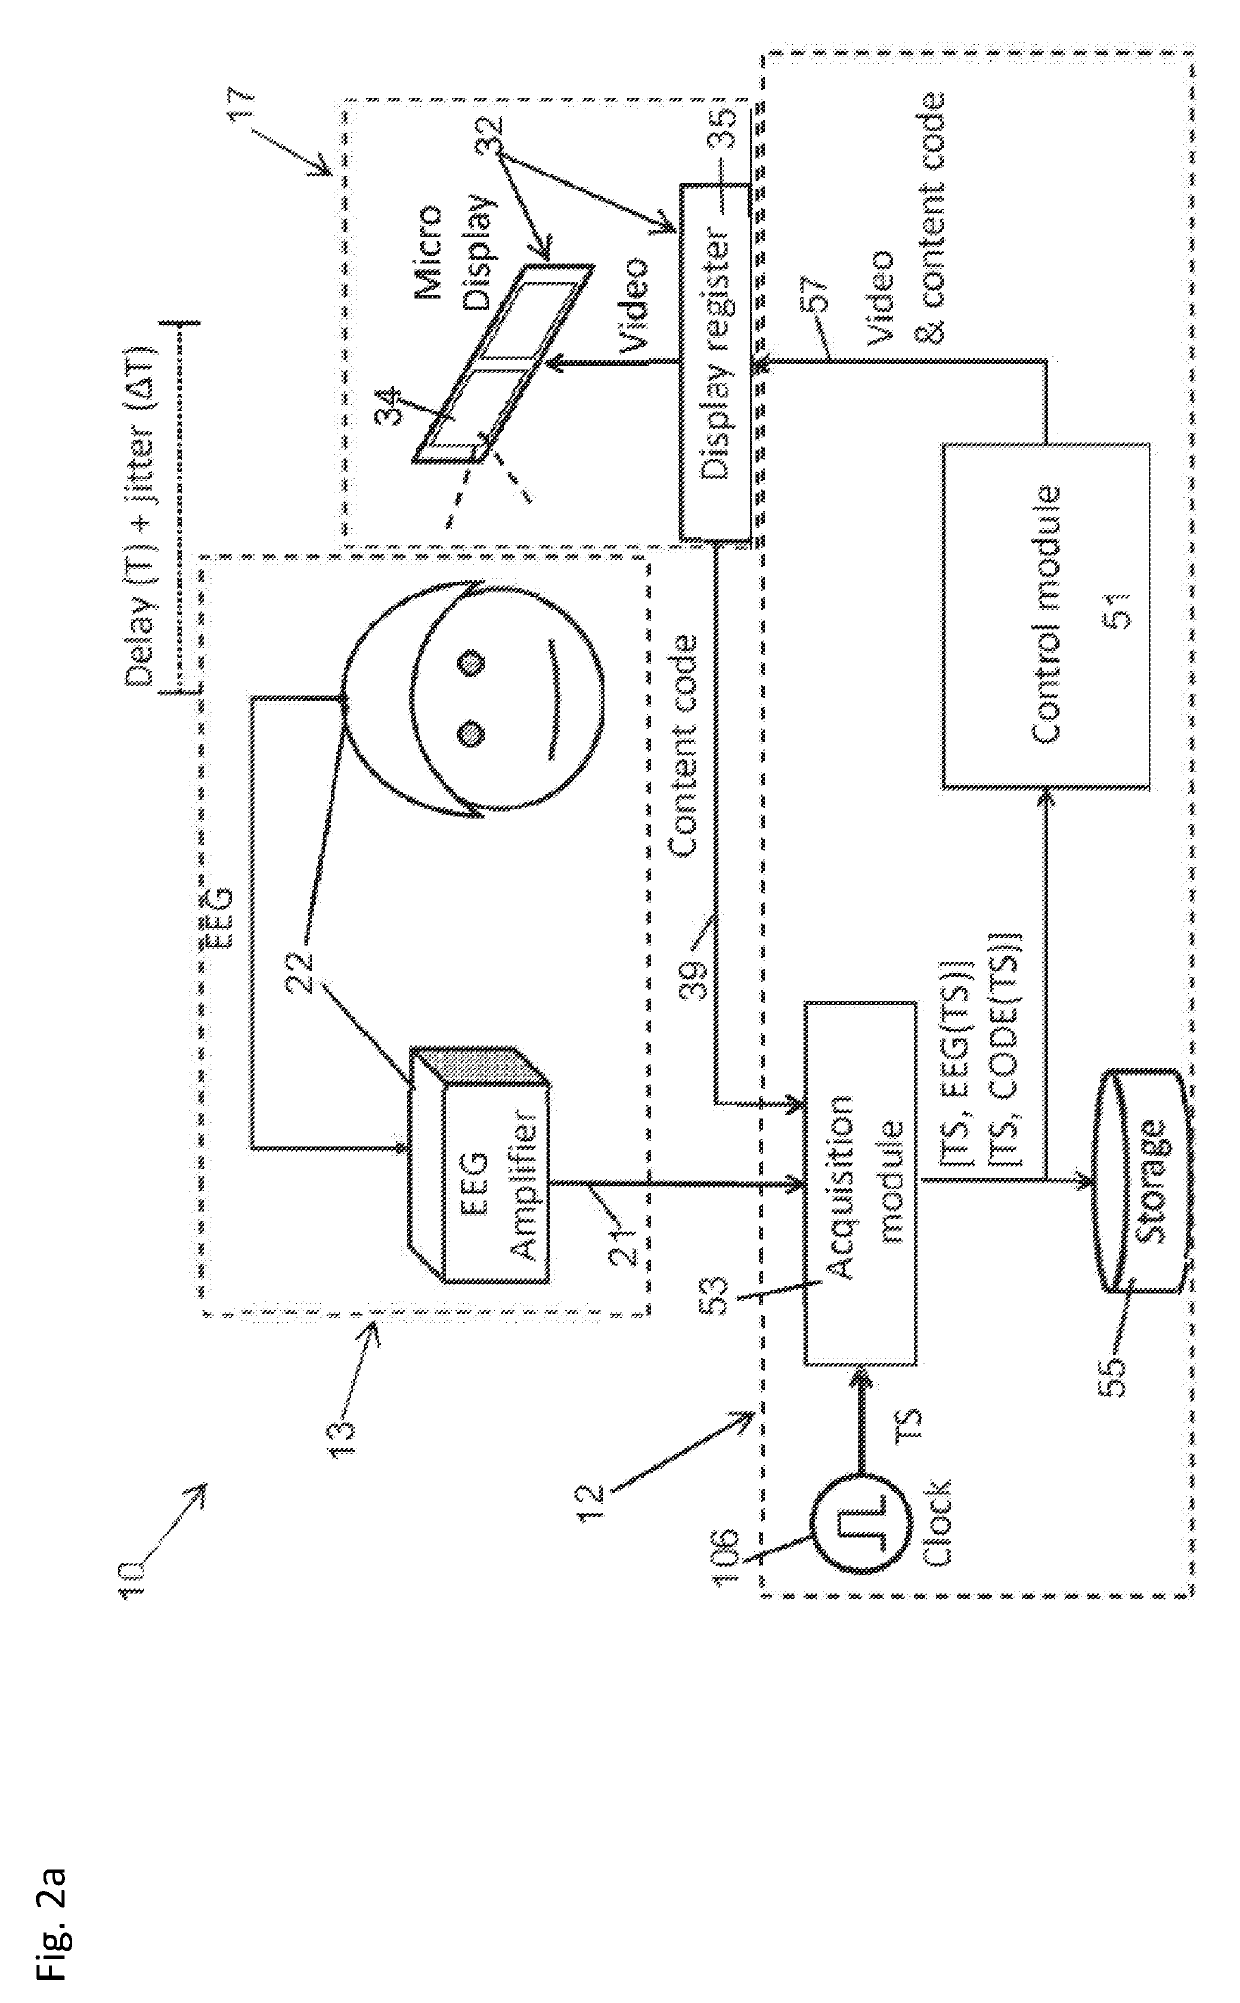 System and method for synchronized neural marketing in a virtual environment